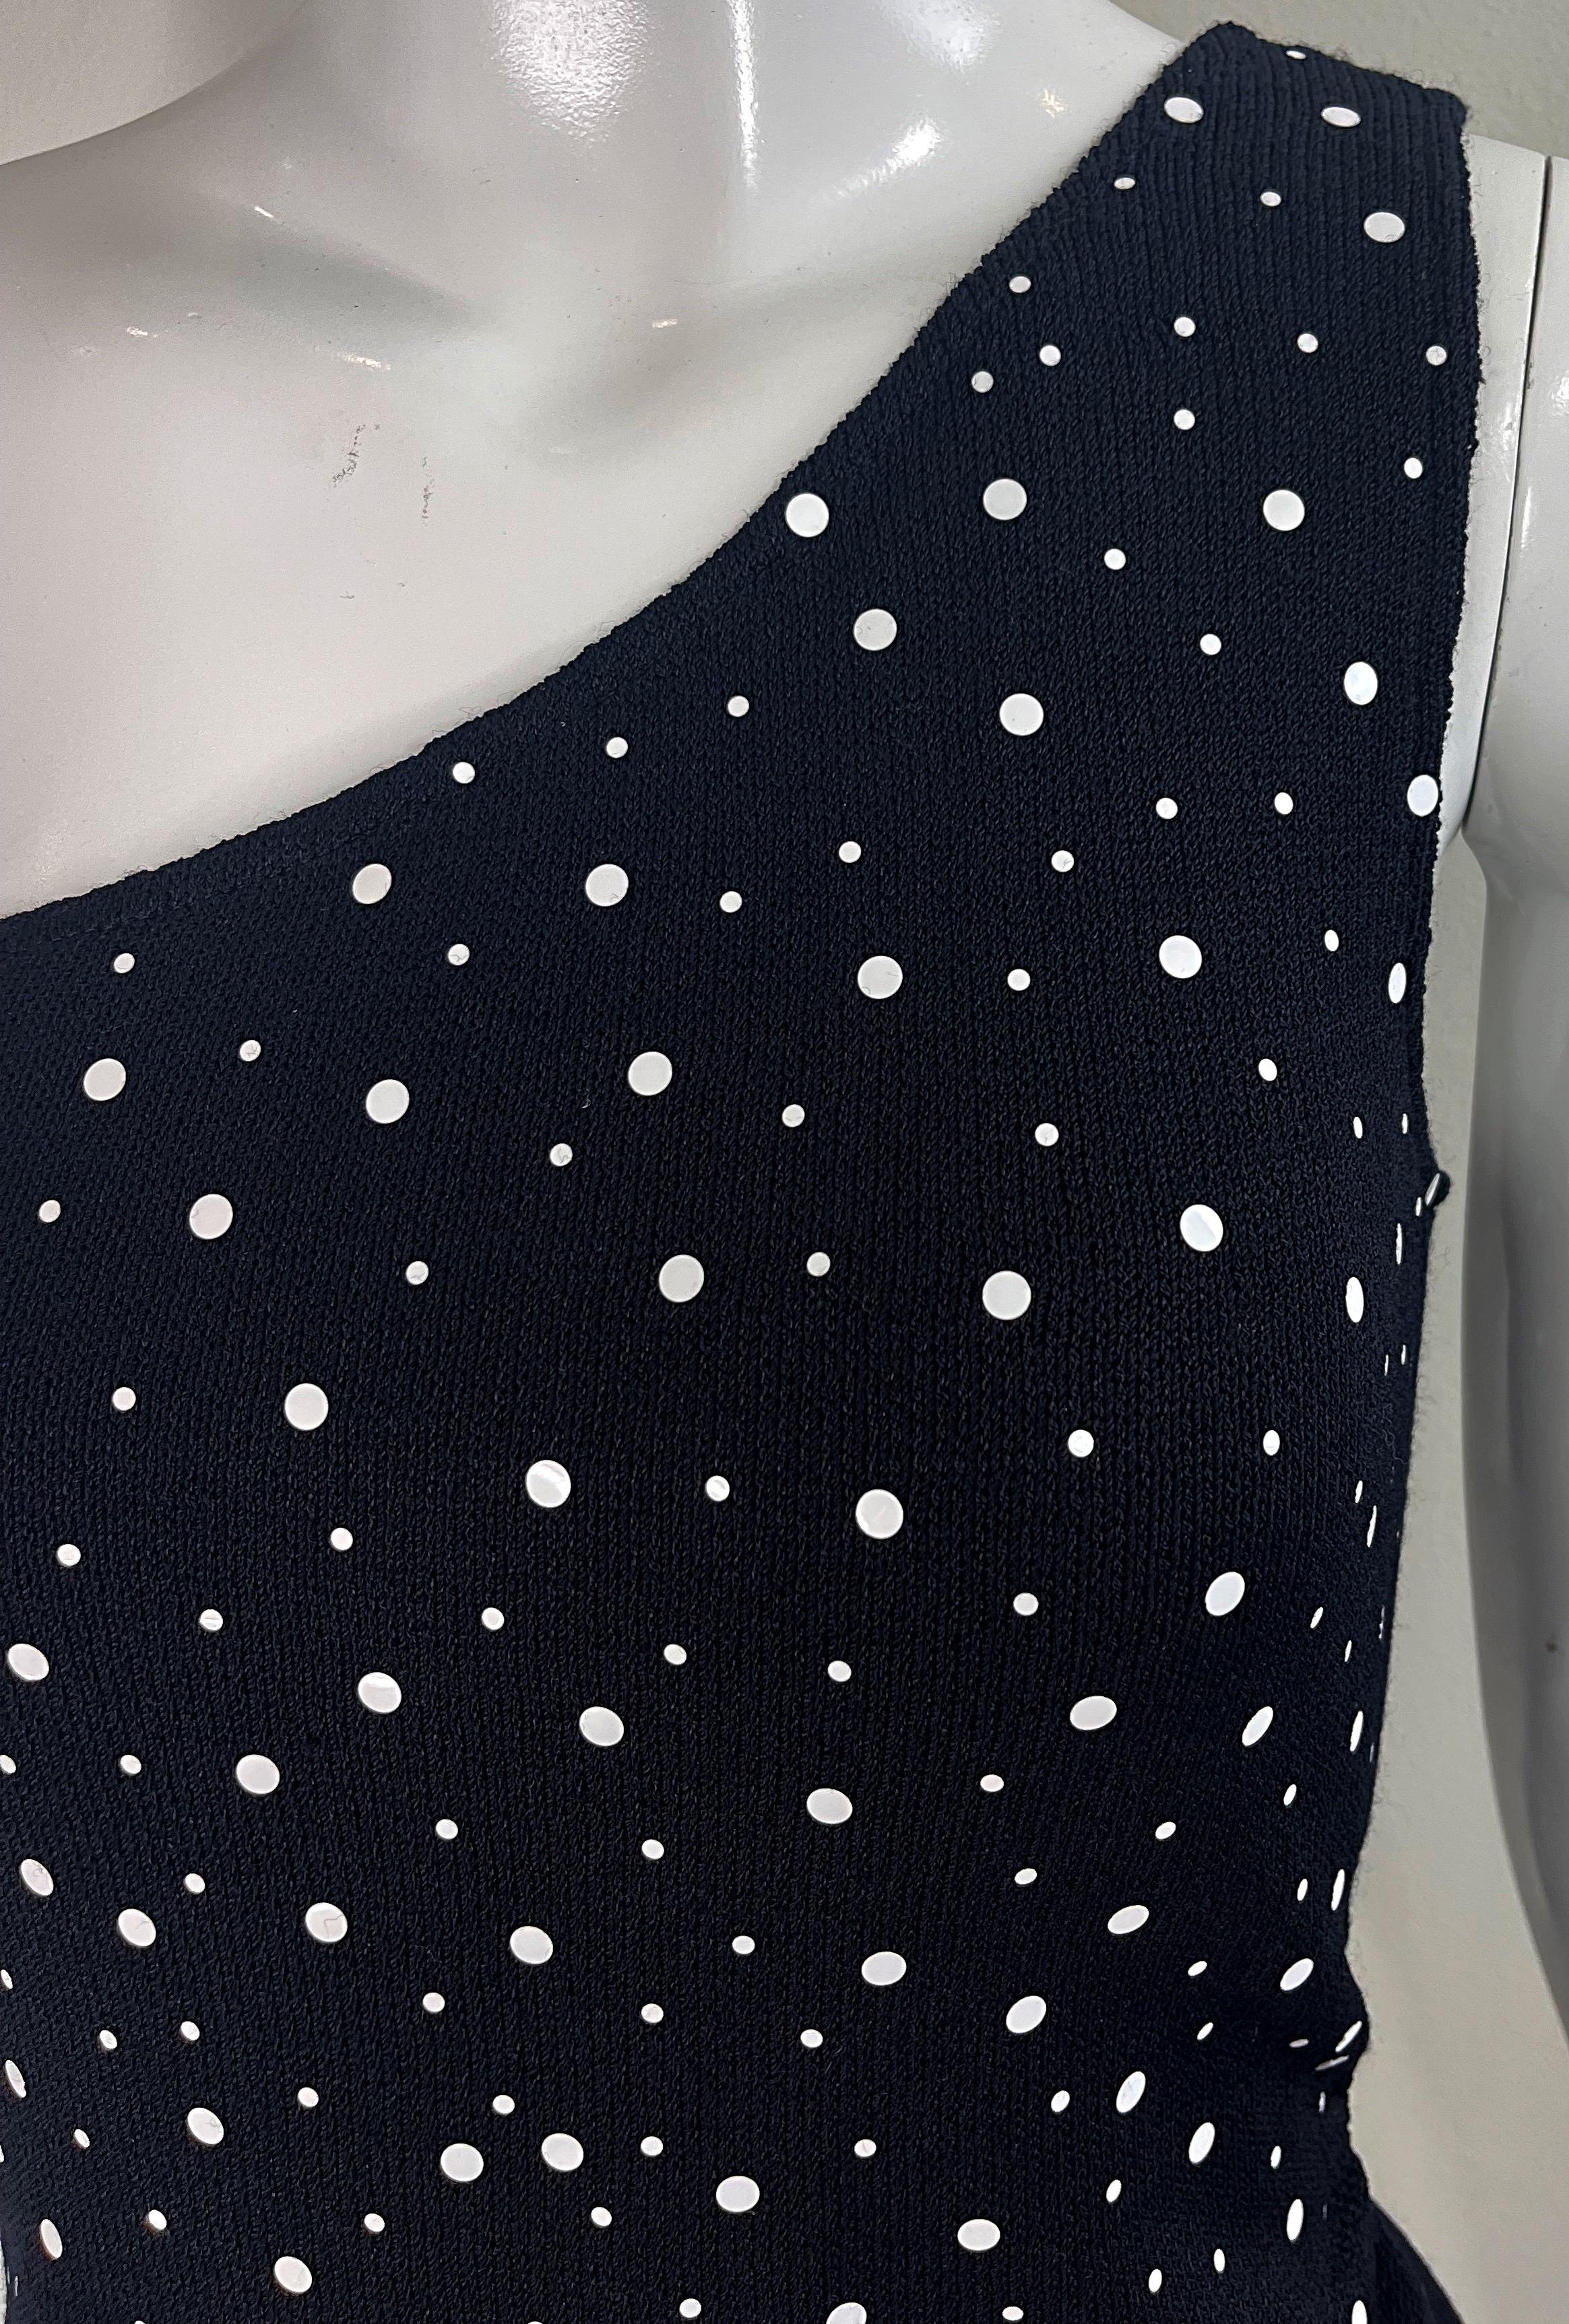 NWT 1990s St. John Collection by Marie Gray Size 8 Black White Polka Dot Top For Sale 5